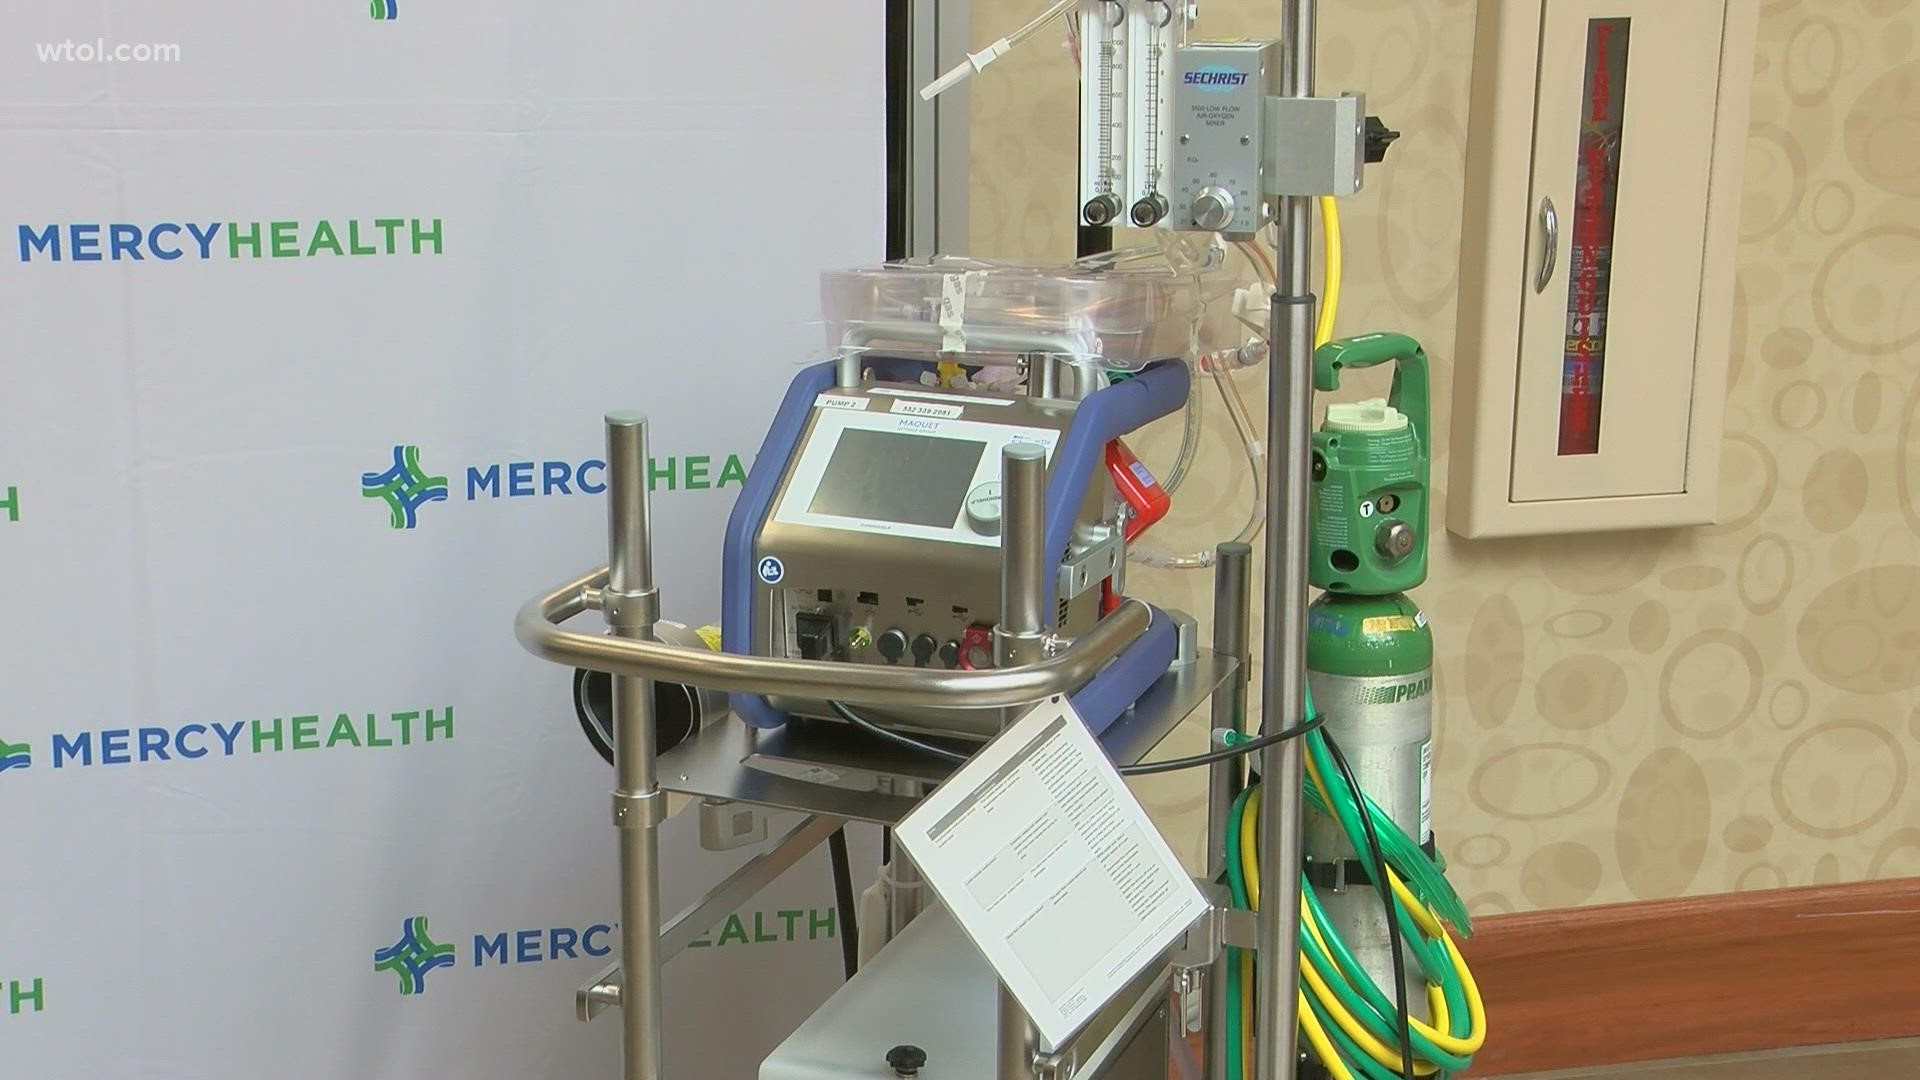 According to the medical center, after spending just over a week on ECMO, the 30-year-old Tiffin resident was taken off the machine and discharged a week later.